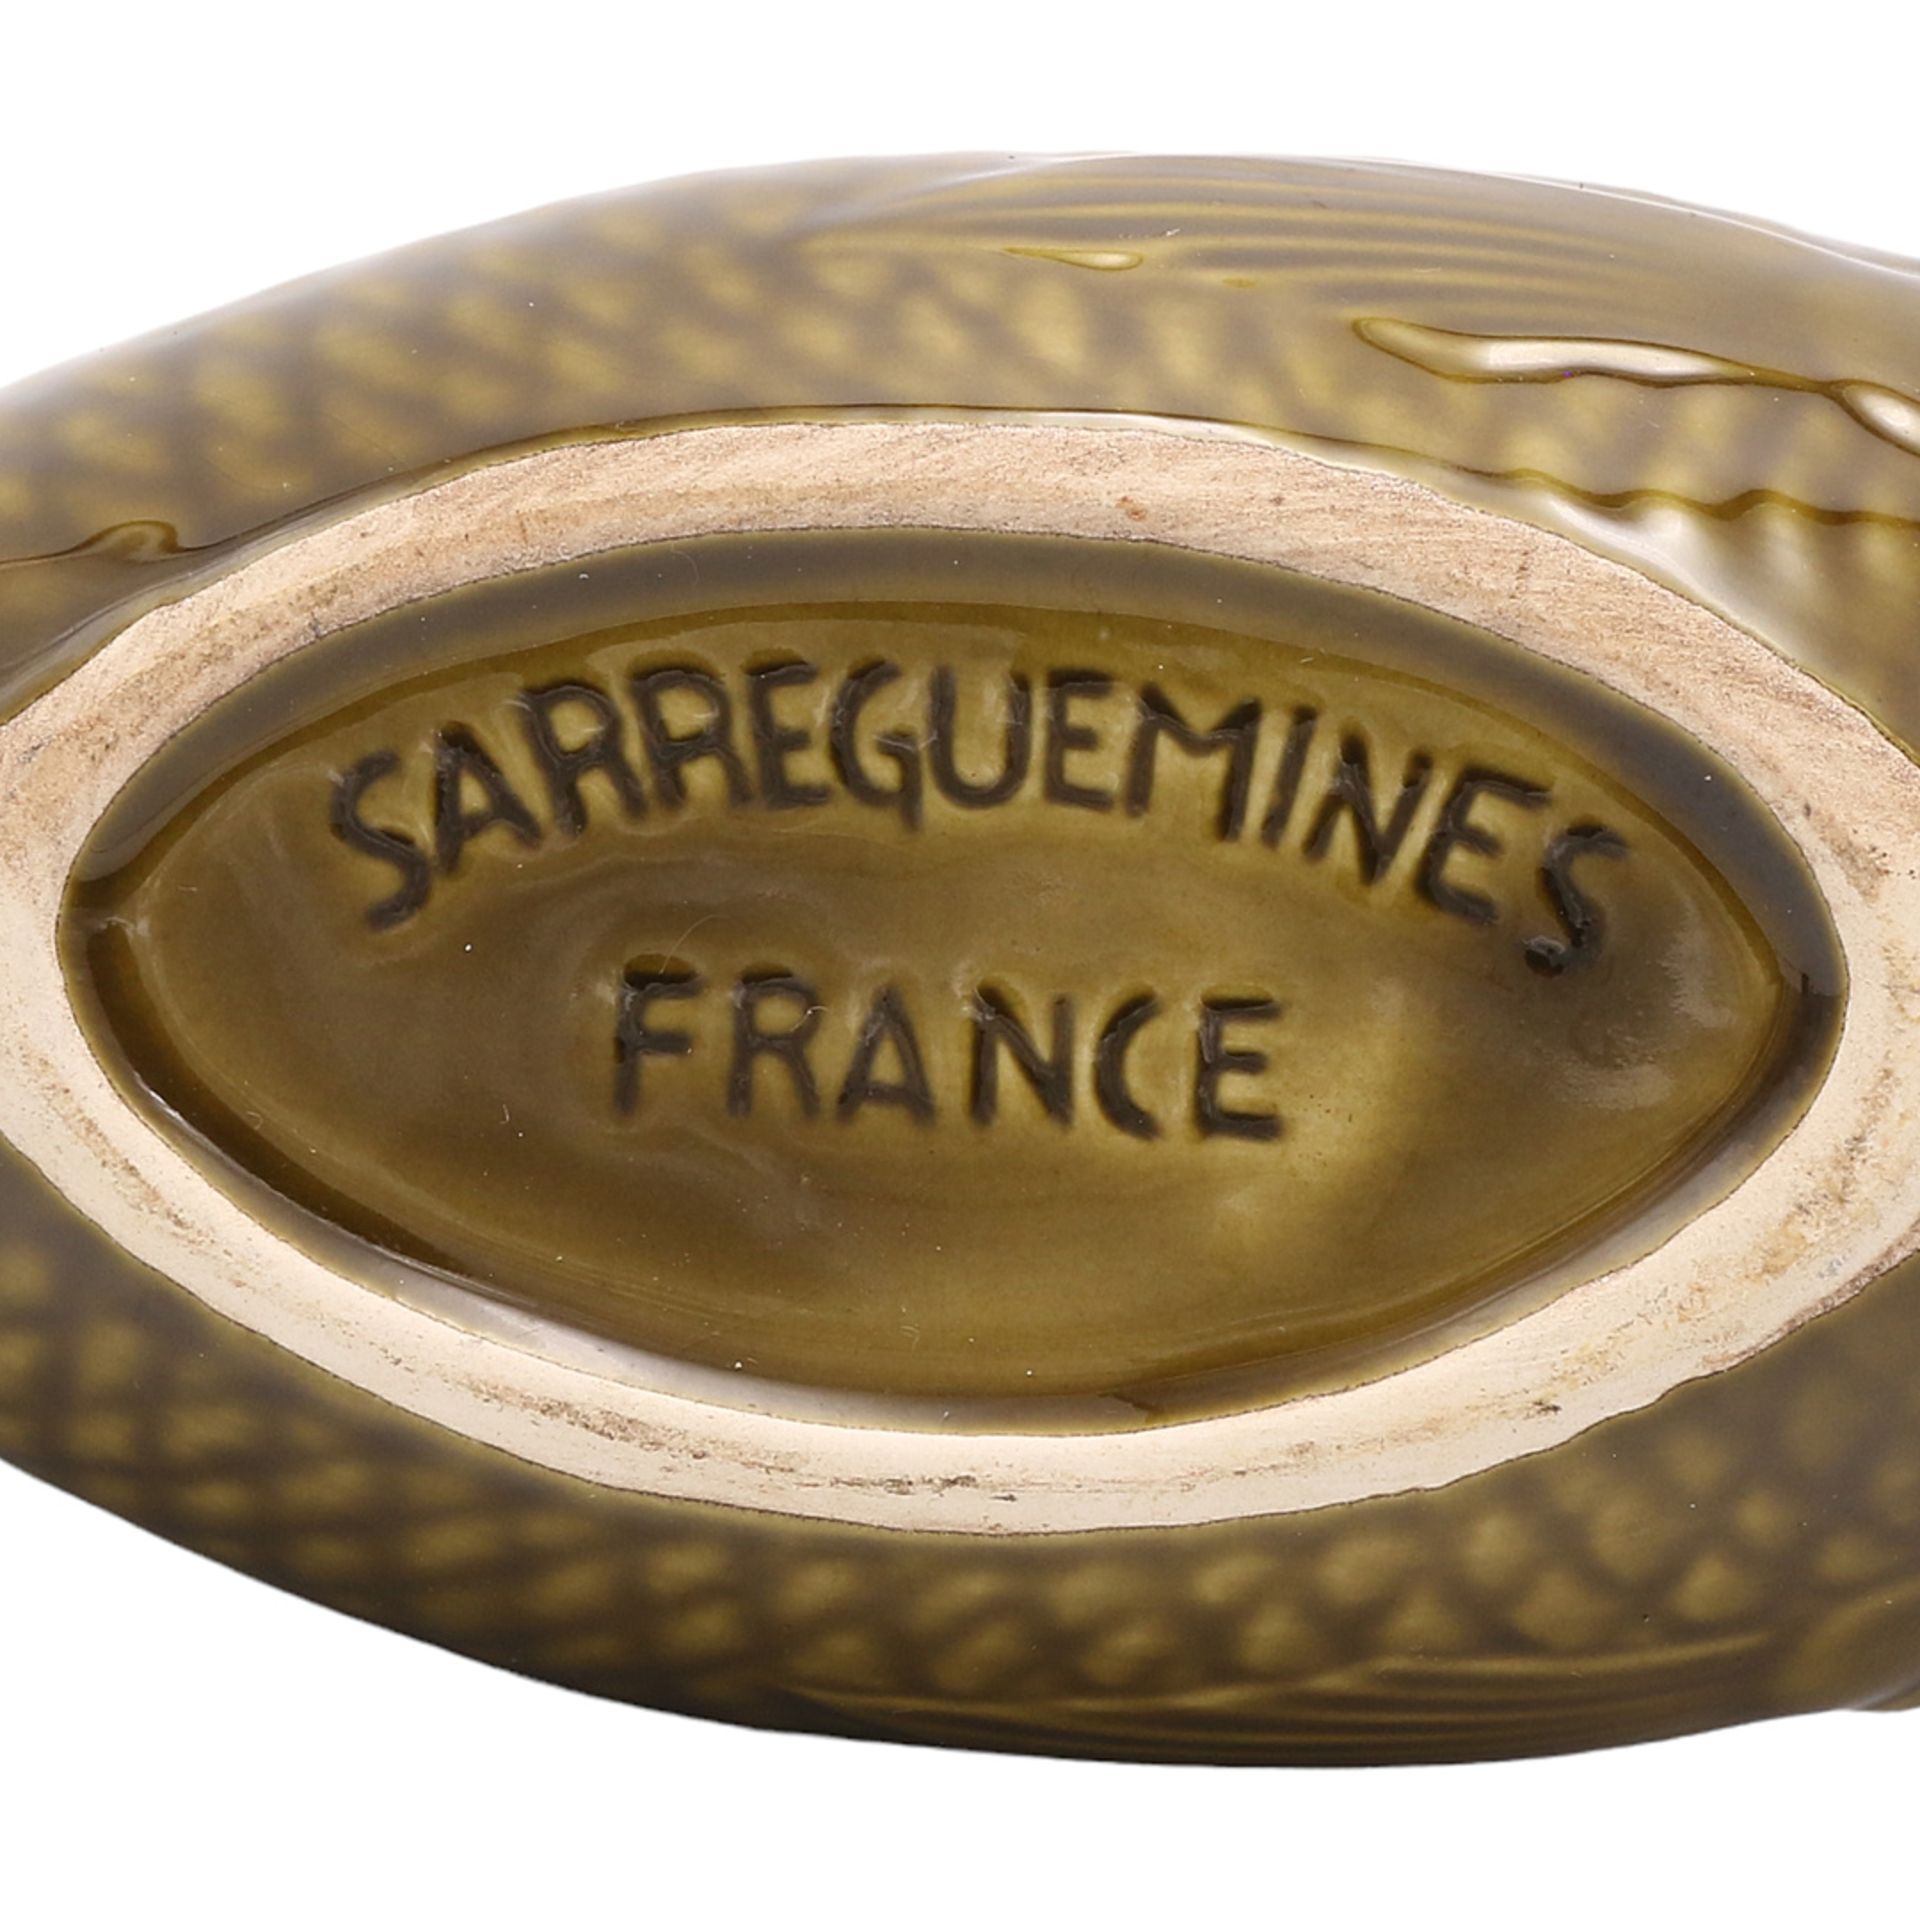 Six fish plates and two sauce boats, Sarreguemines, France, 2nd half of the 20th century - Image 5 of 5